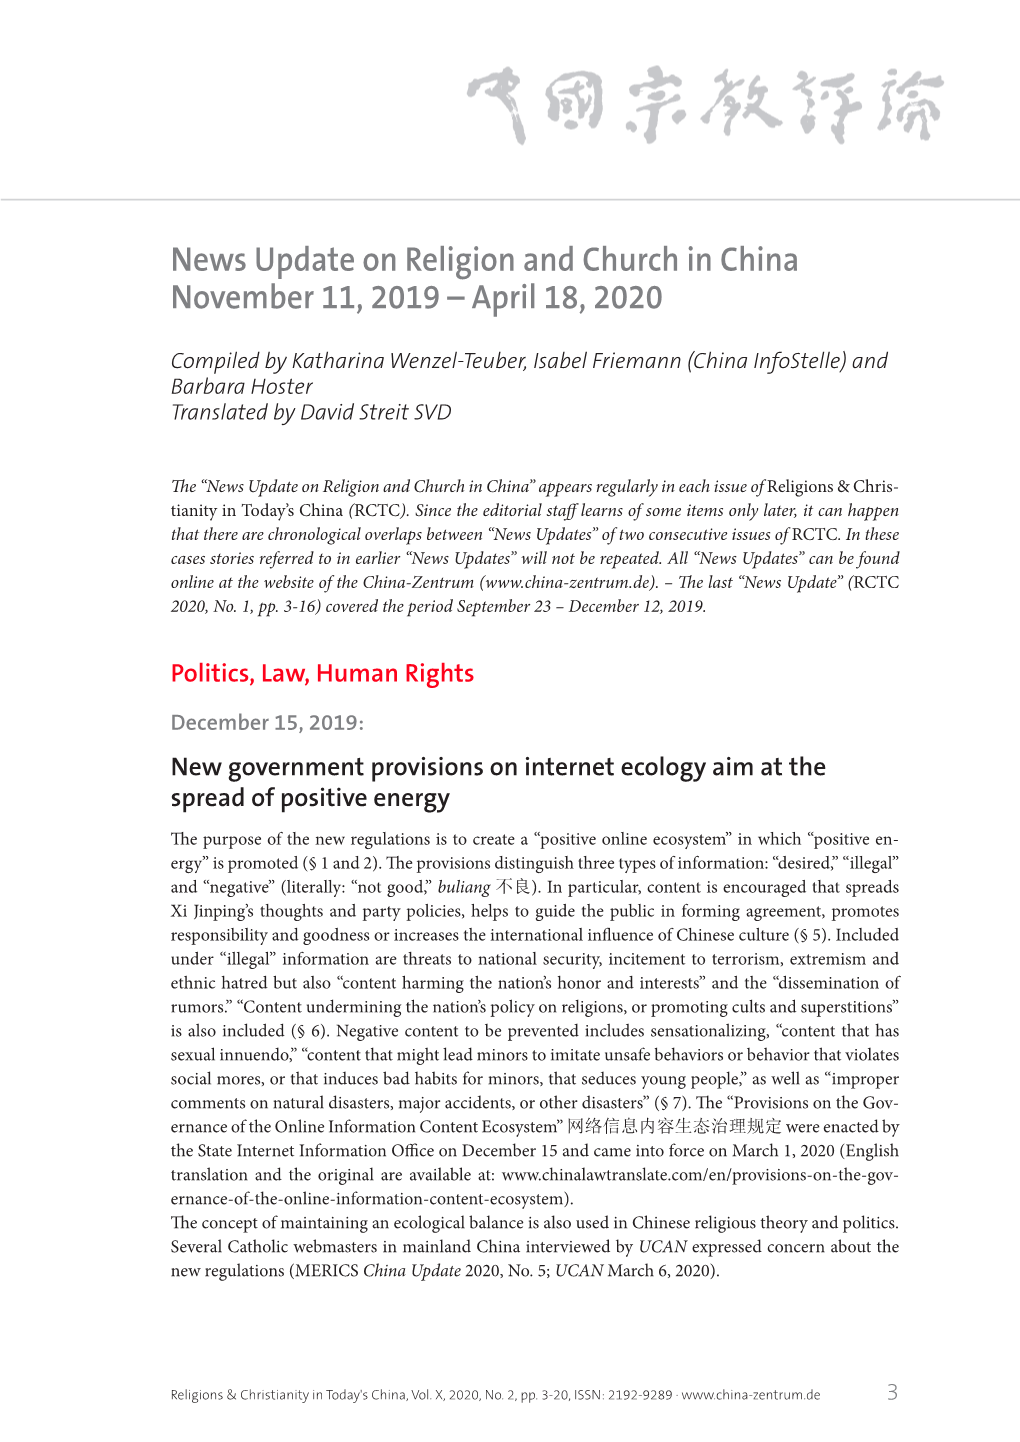 News Update on Religion and Church in China November 11, 2019 – April 18, 2020